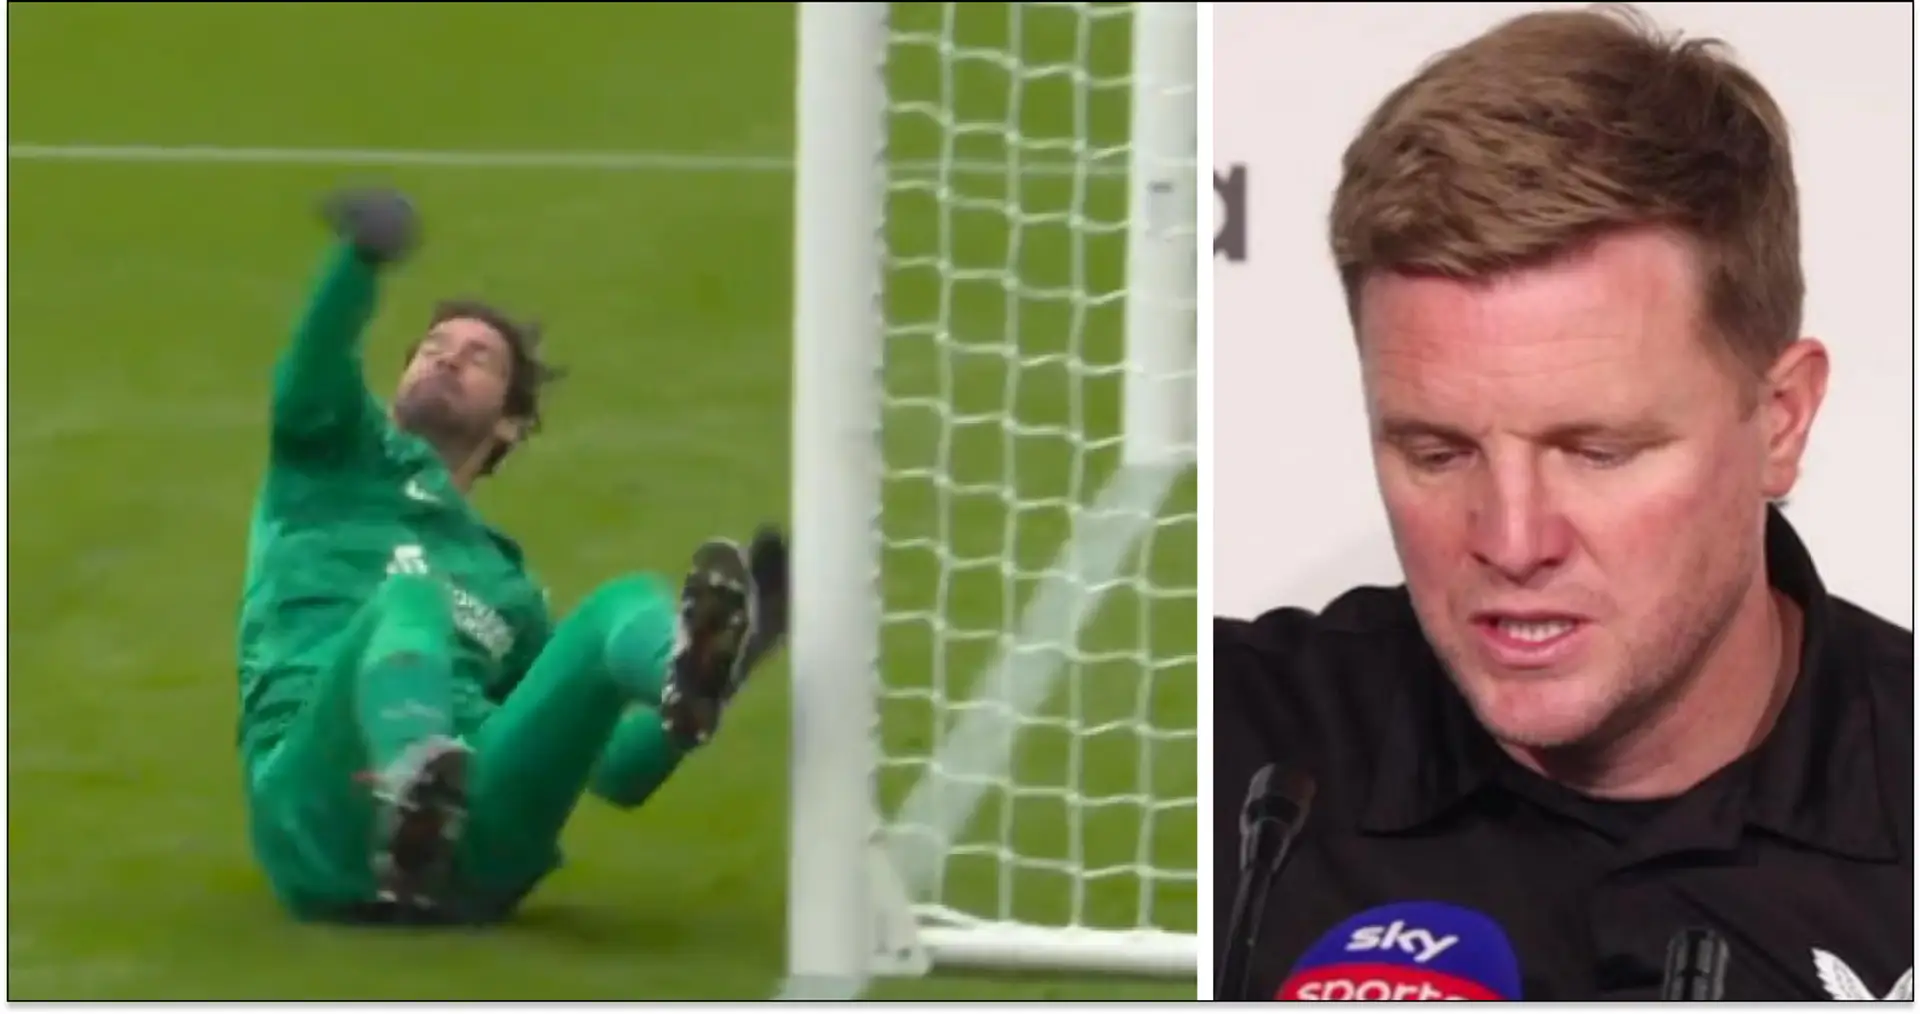 Eddie Howe says Alisson's miracle save on Almiron among 'best I've ever seen' — watch it here